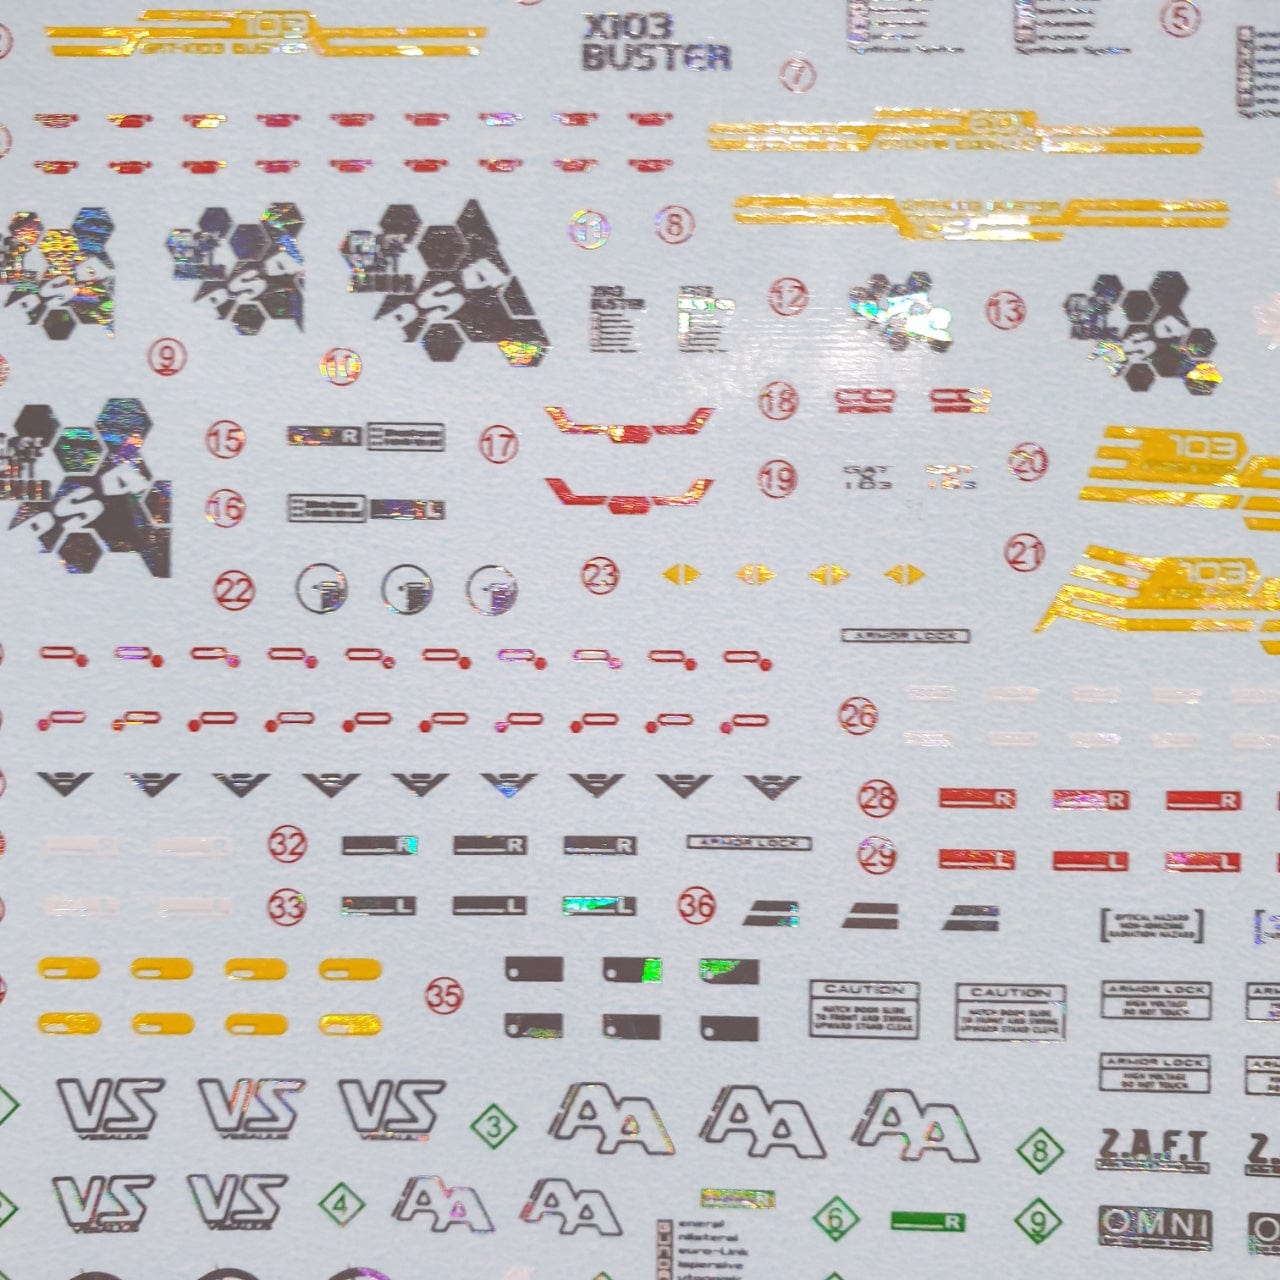 DELPI Scale Model Accessories Holo 1/100 Delpi Decal MG Buster (Normal and Holo)